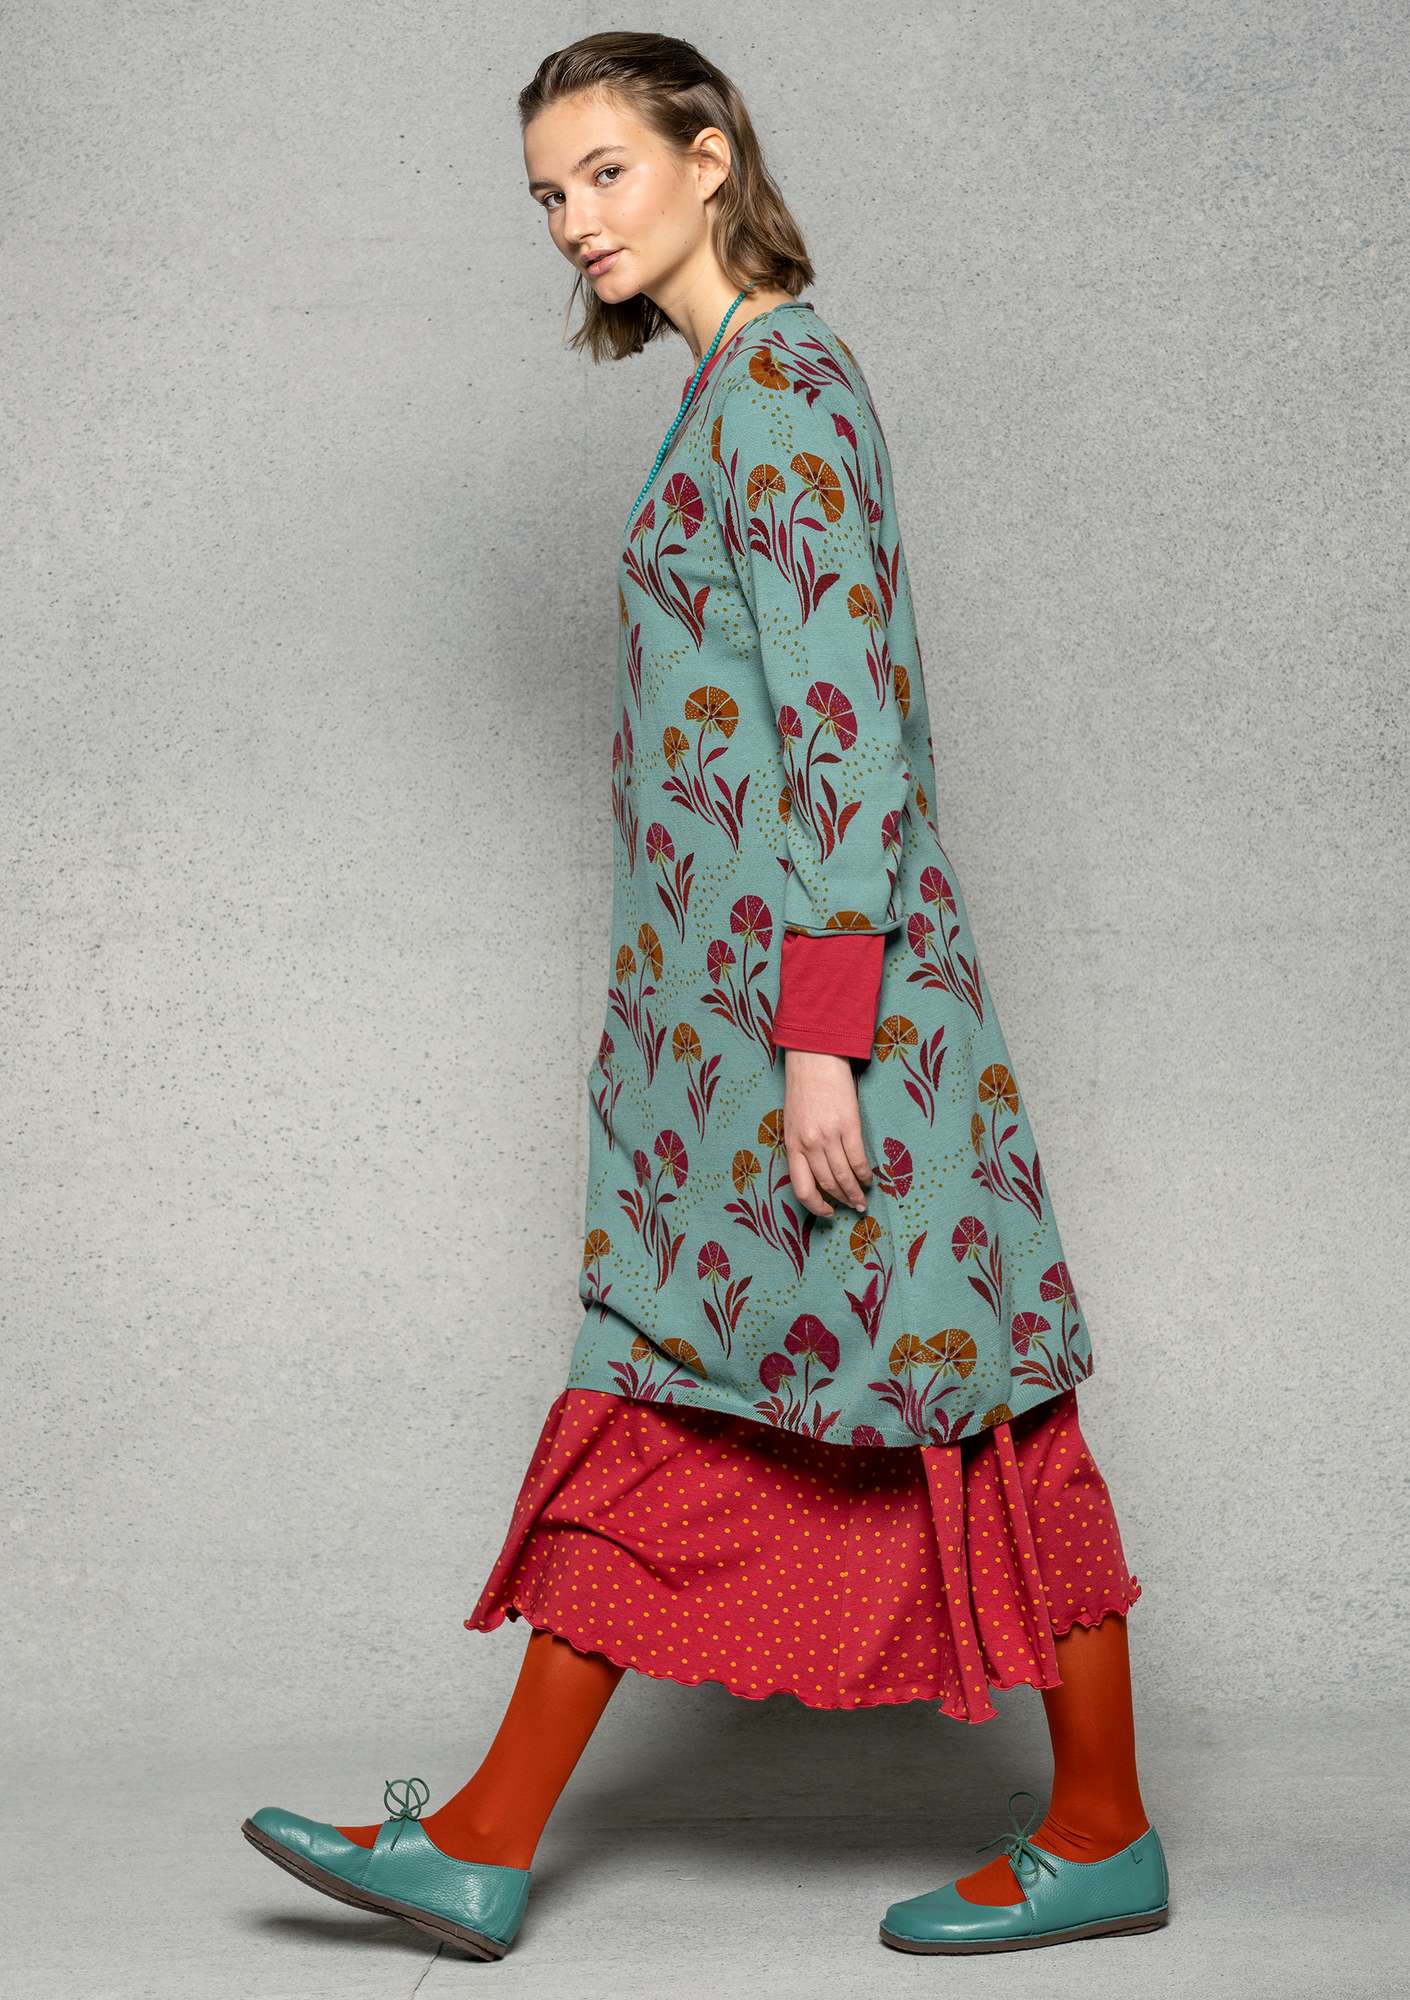 “Mosippa” dress in recycled cotton knit fabric artemisia/patterned thumbnail